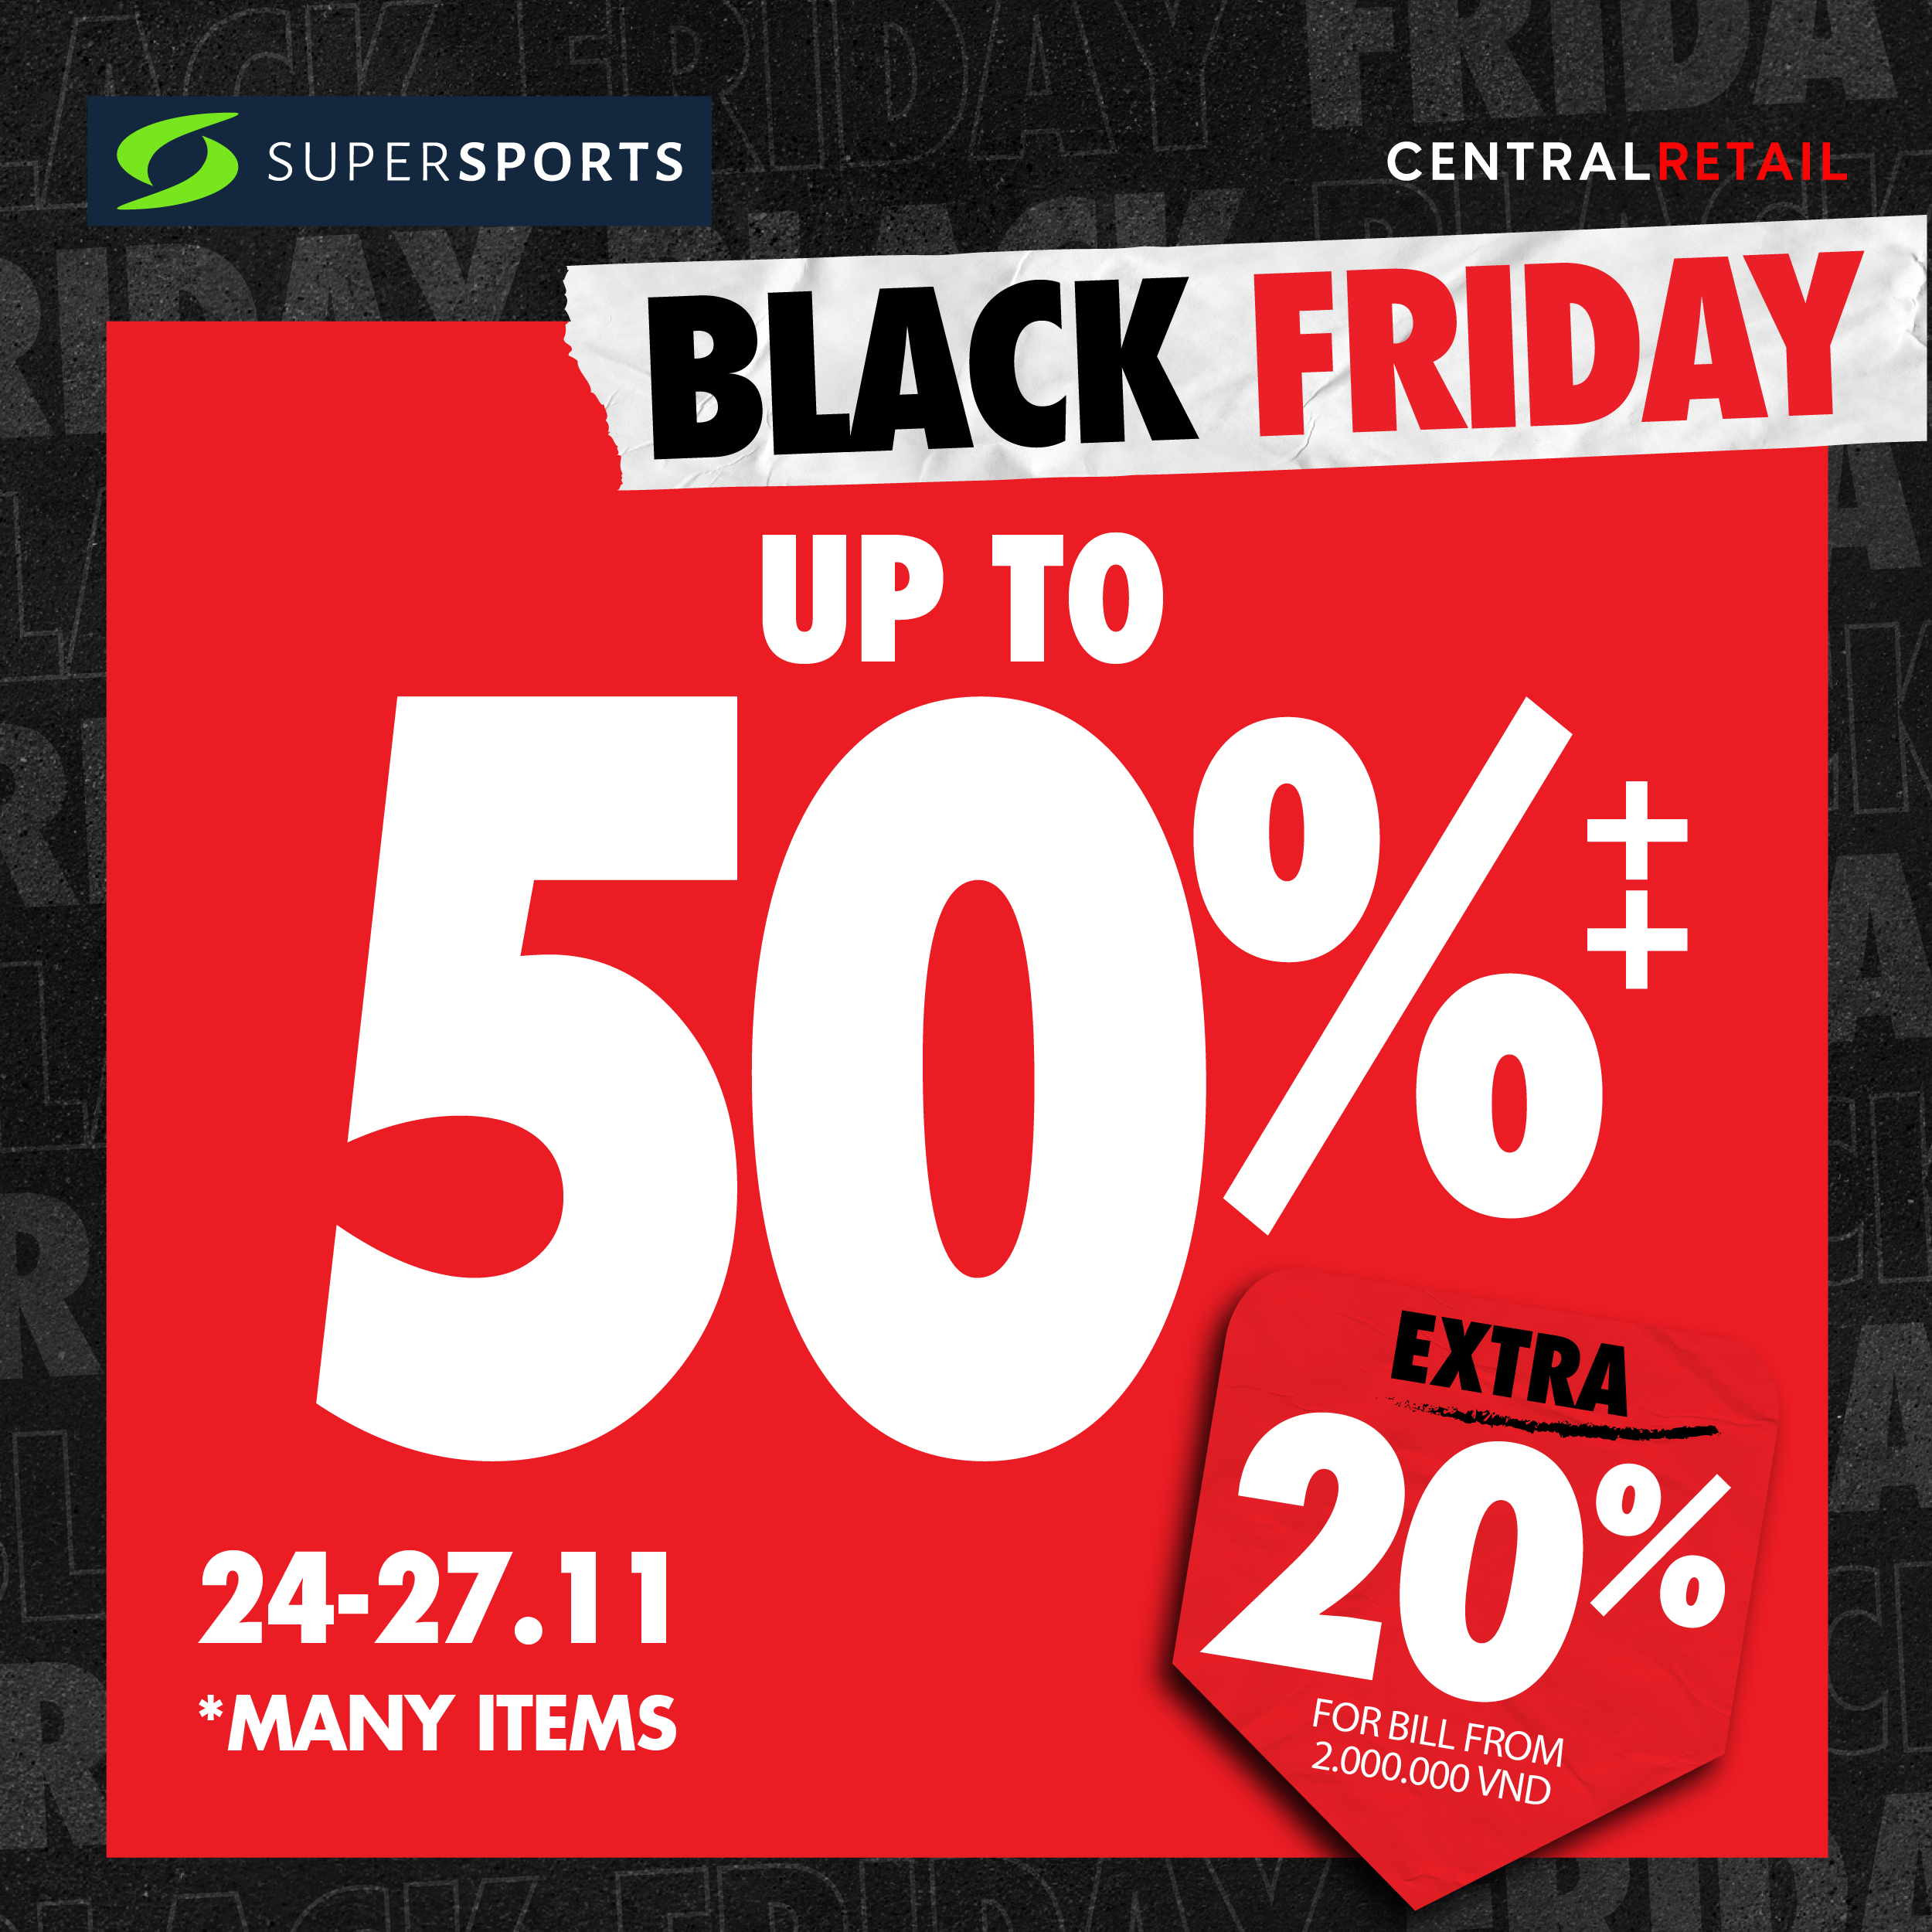 BLACK FRIDAY - COME TO SUPERSPORTS AND ENJOY SPECIAL DEAL